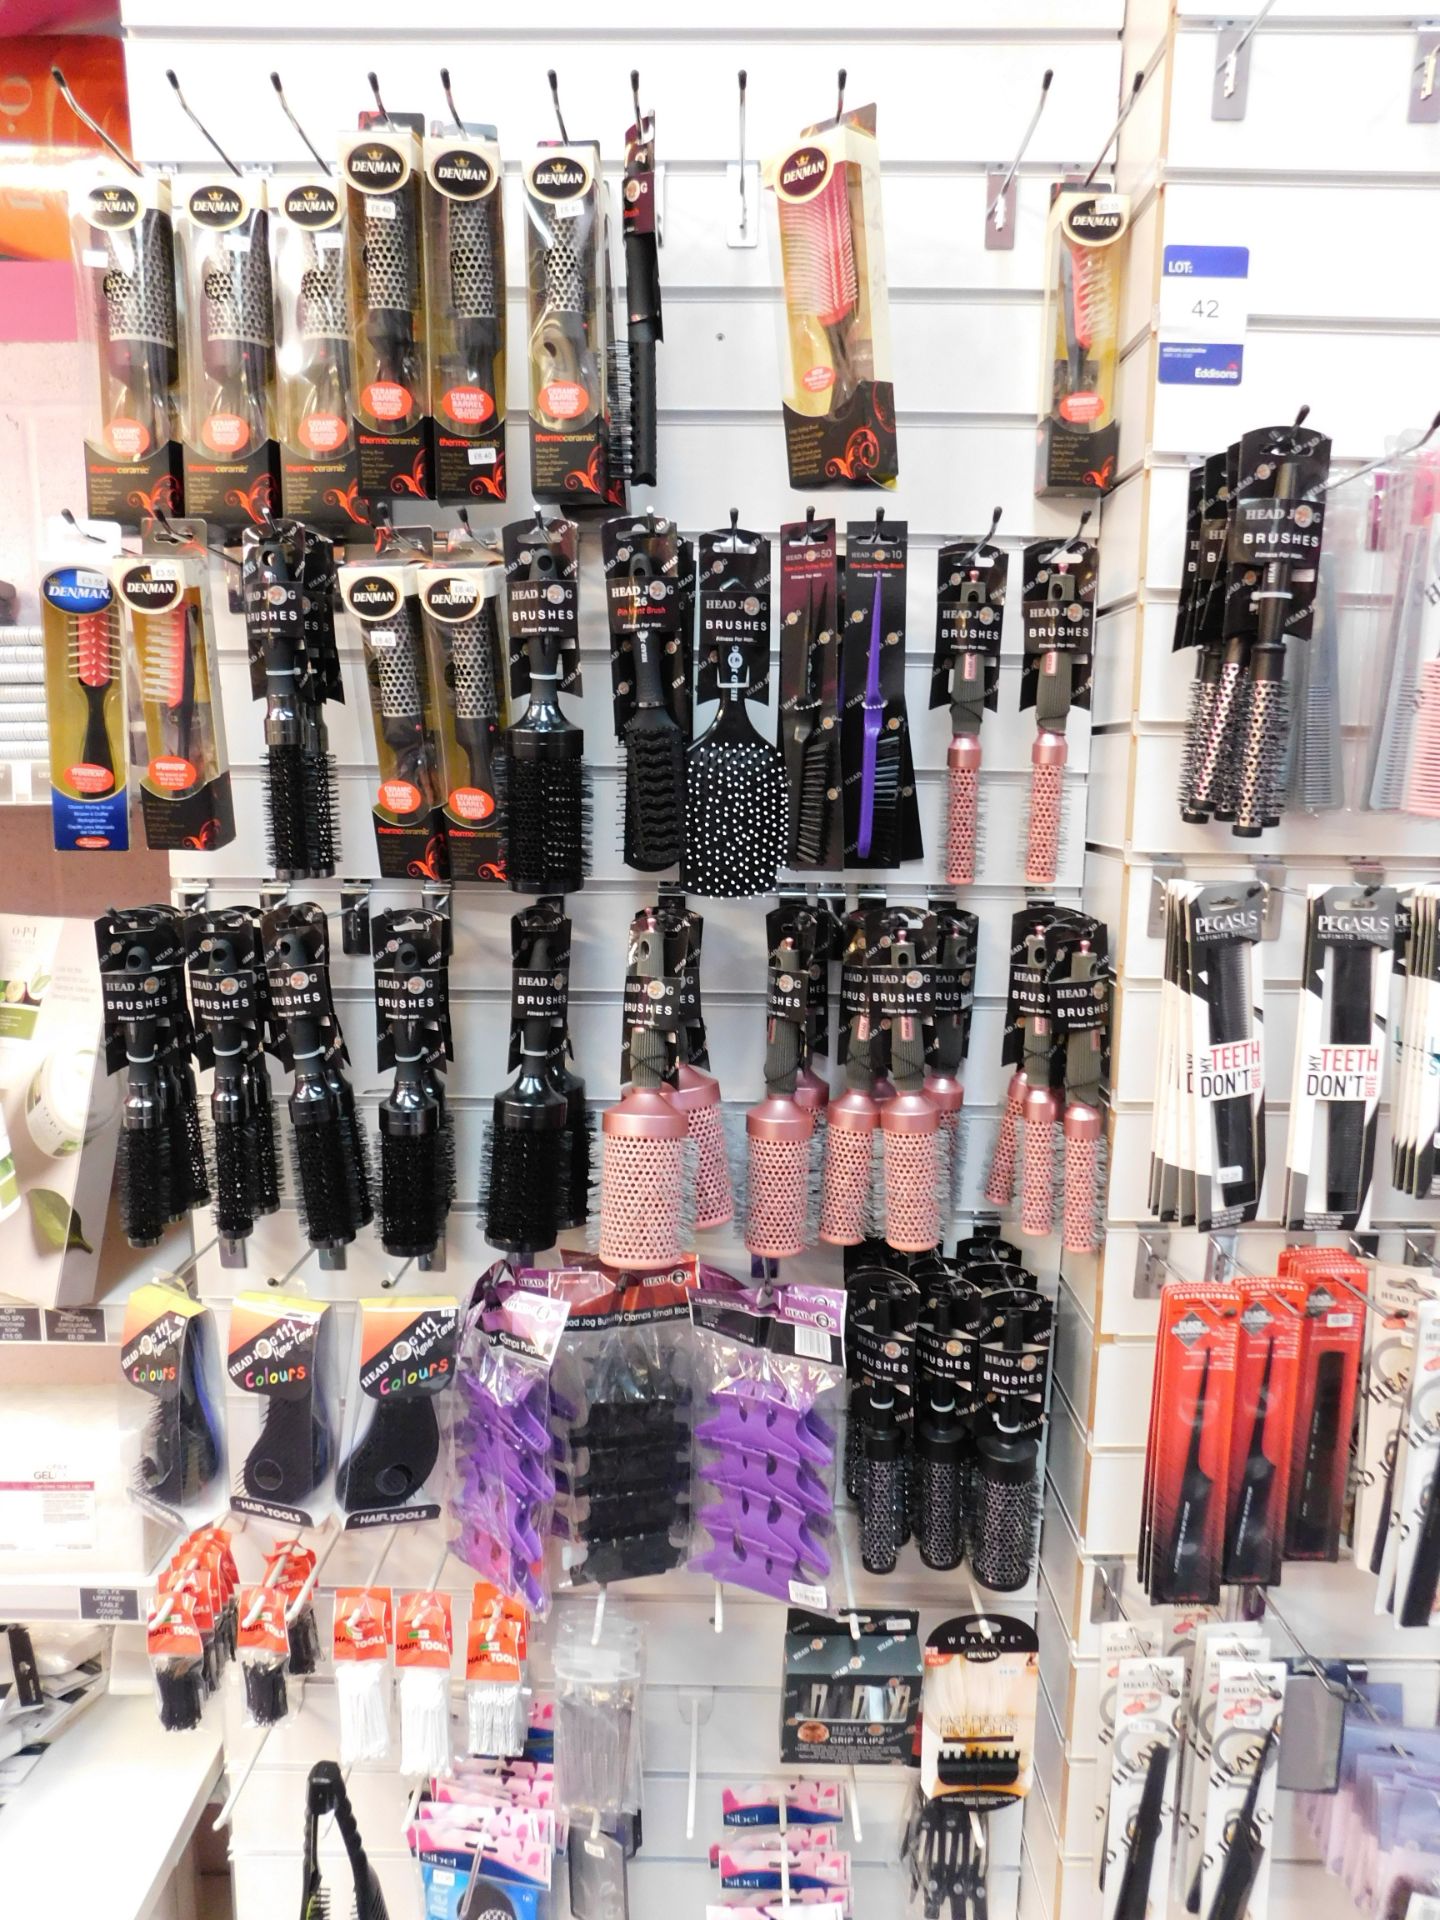 Assortment of hair brushes to shop display - Image 2 of 2